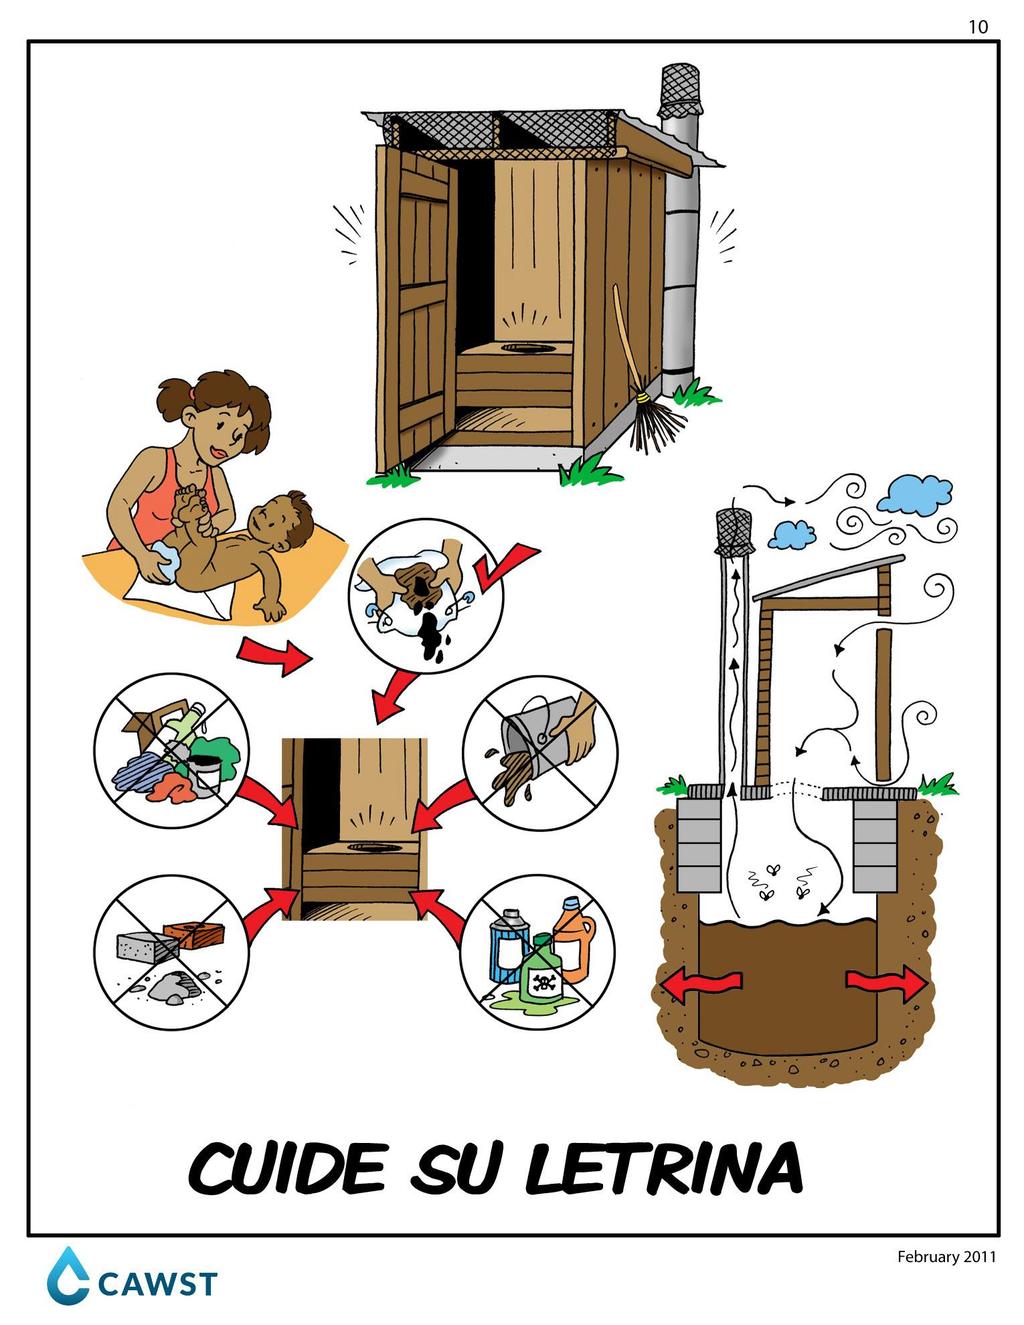 Latrine Use and Maintenance DAILY: -Put down the toilet seat after each use -Dispose of toilet paper and feminine products in a proper bin with a lid -Close the latrine door after each use -Properly